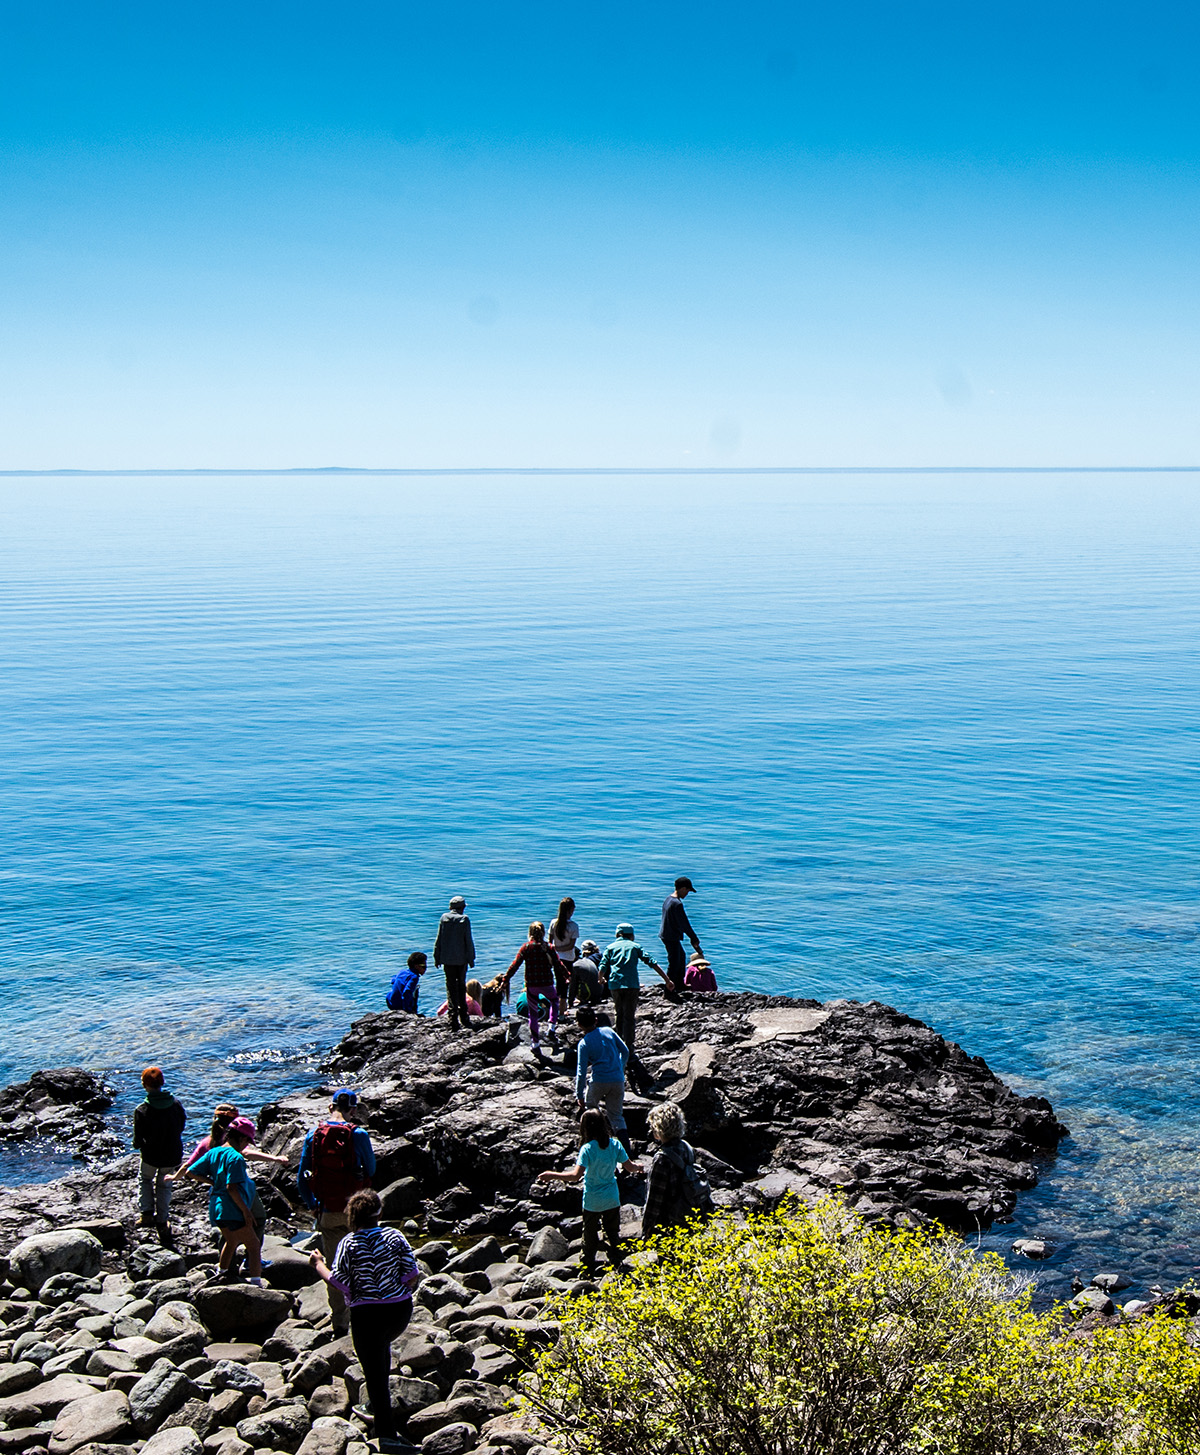 A group of students explores the rocky shores of Lake Superior